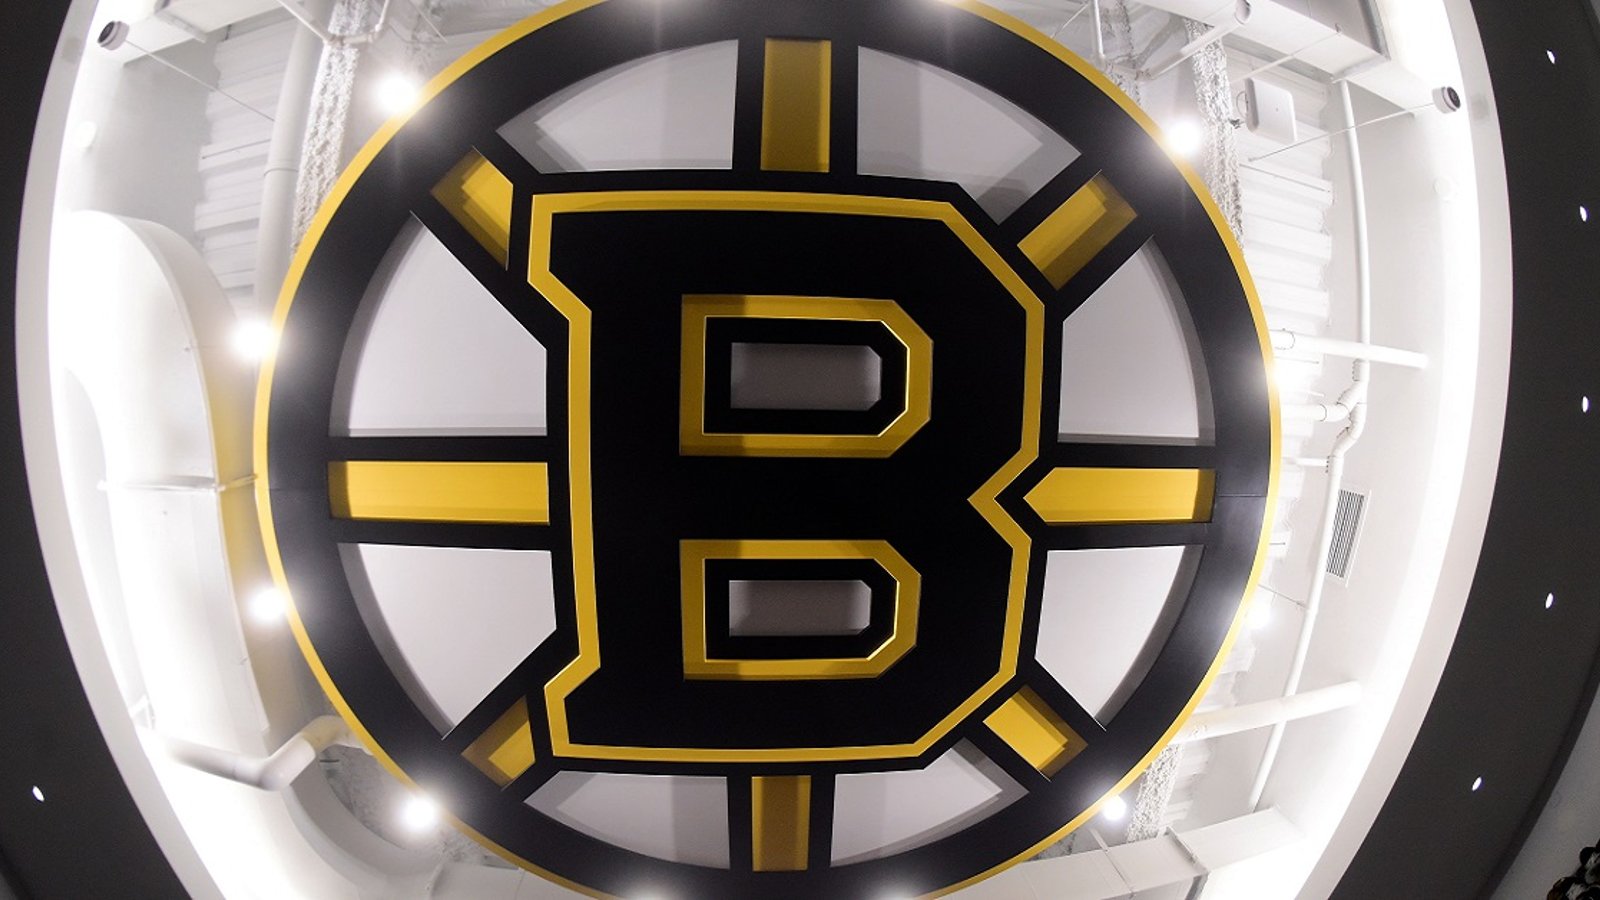 The Boston Bruins are breaking a long hockey tradition.